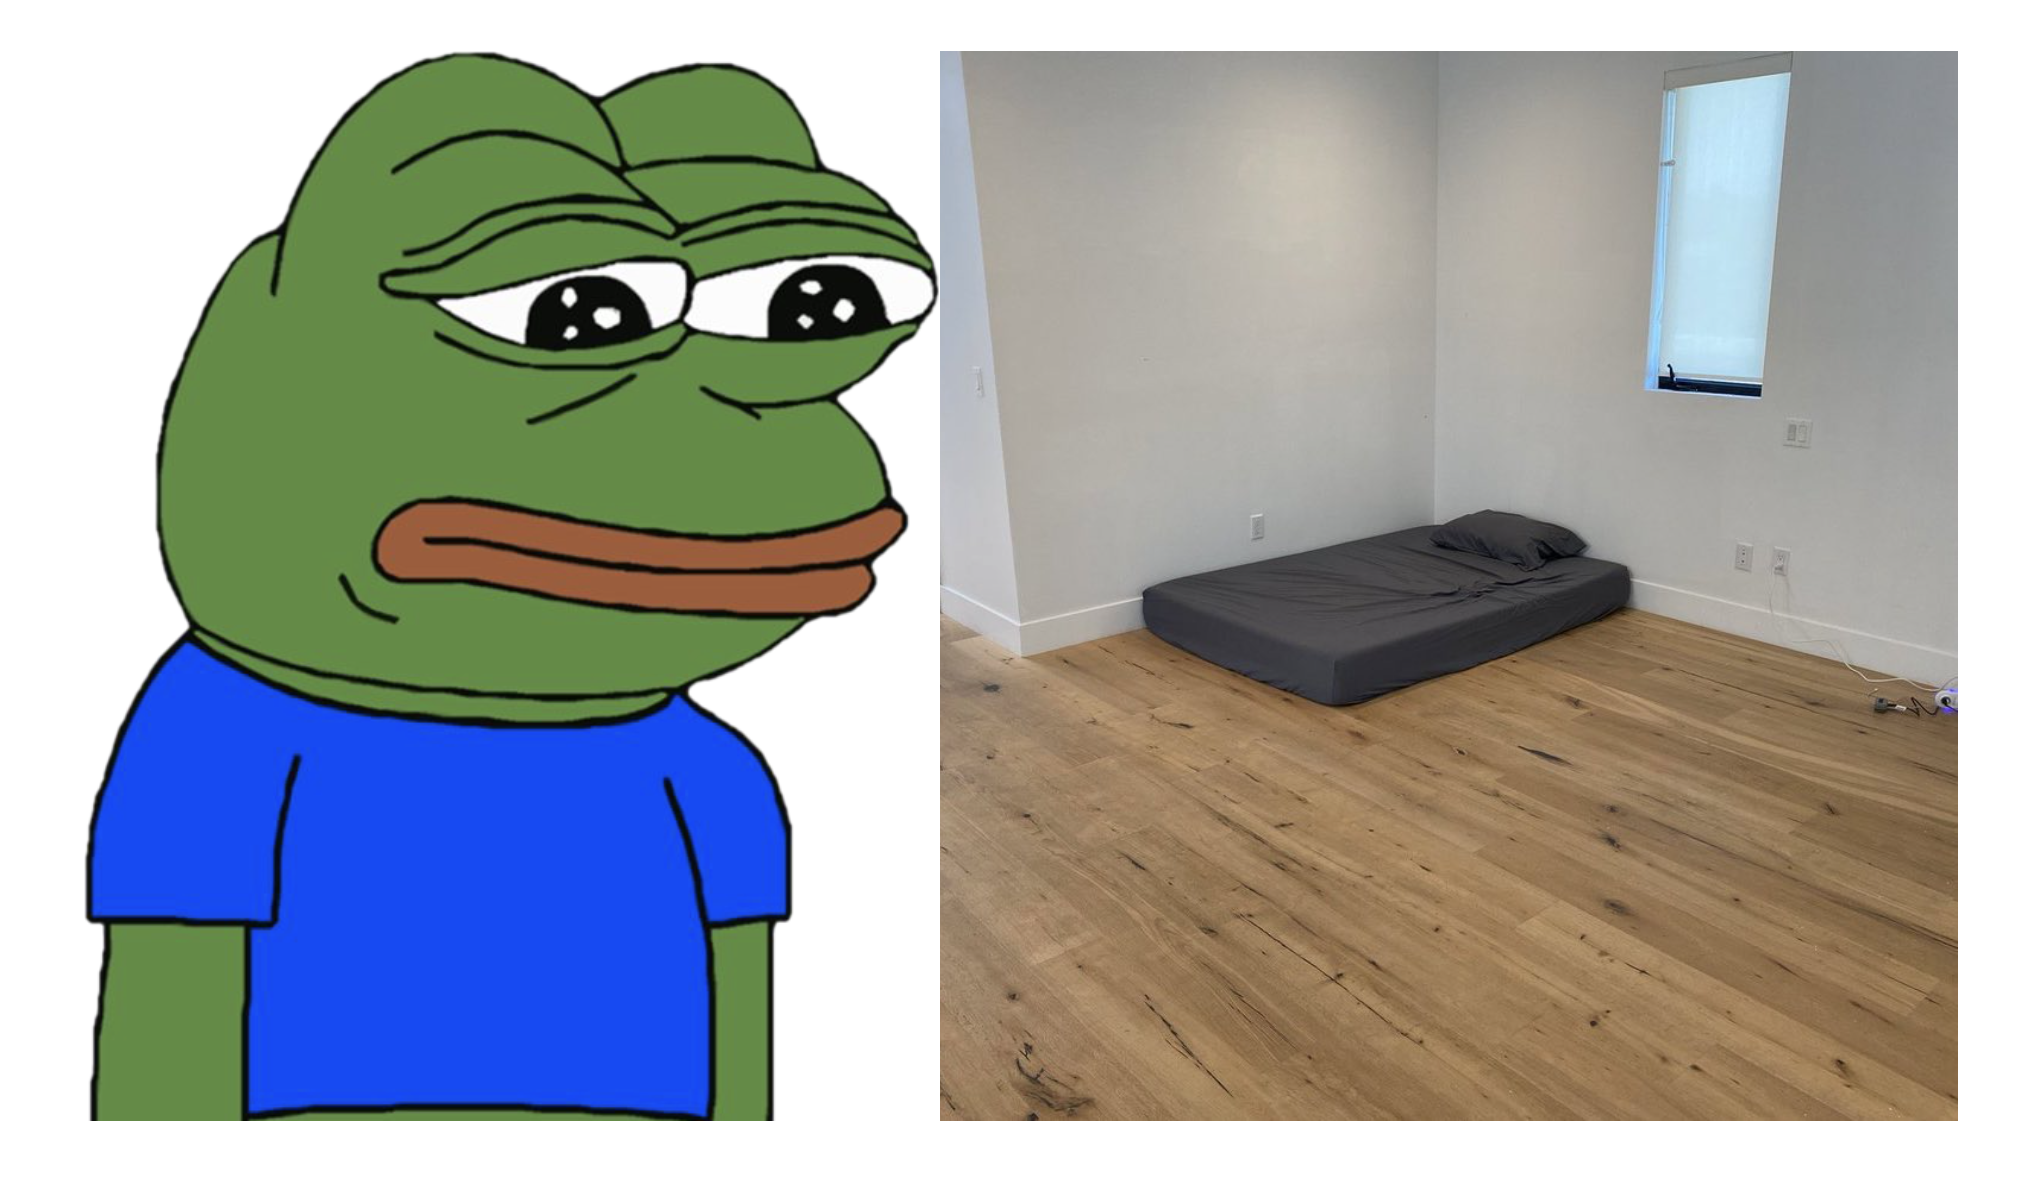 Pepe the frog (left), crypto Mème with a Mattress on the floor (right)